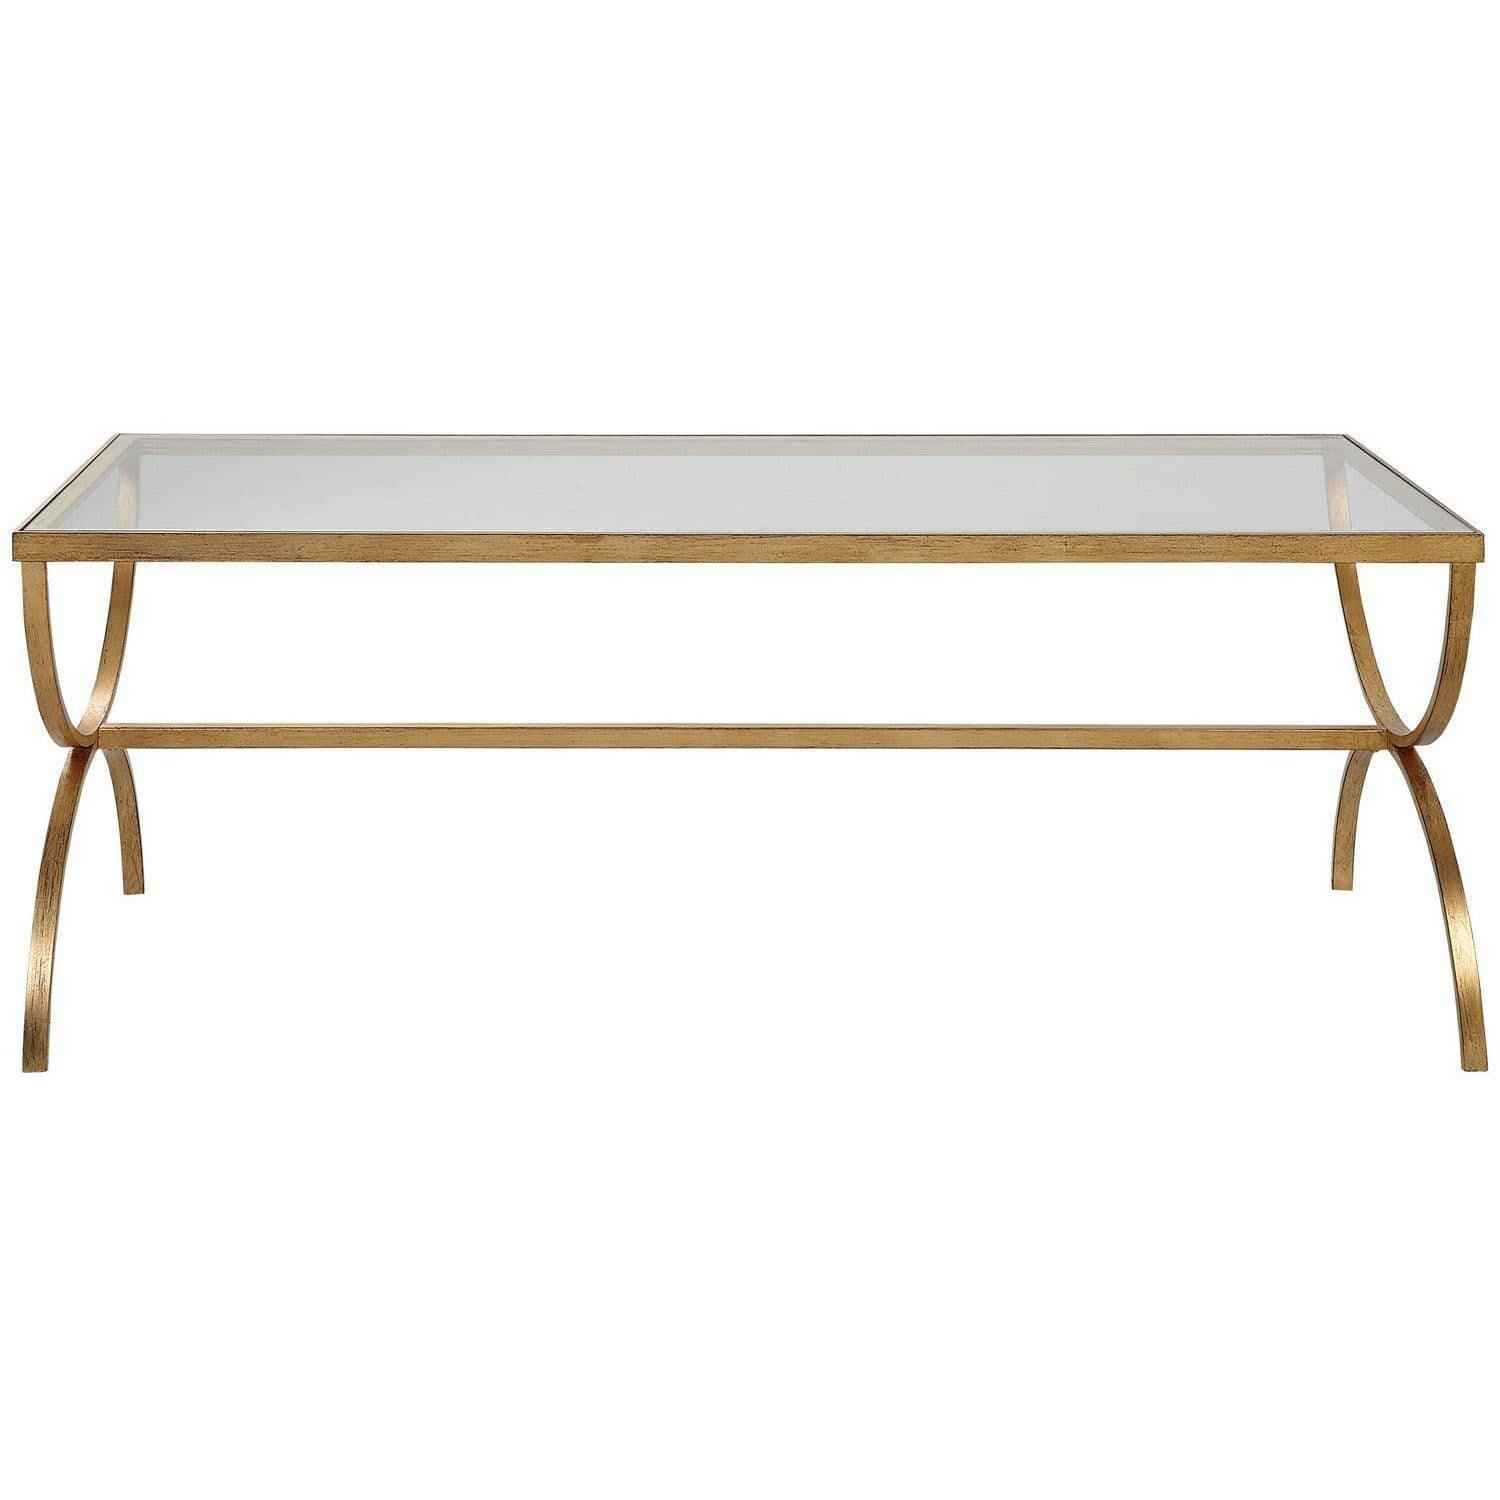 The Uttermost - Crescent Coffee Table - 25186 | Montreal Lighting & Hardware